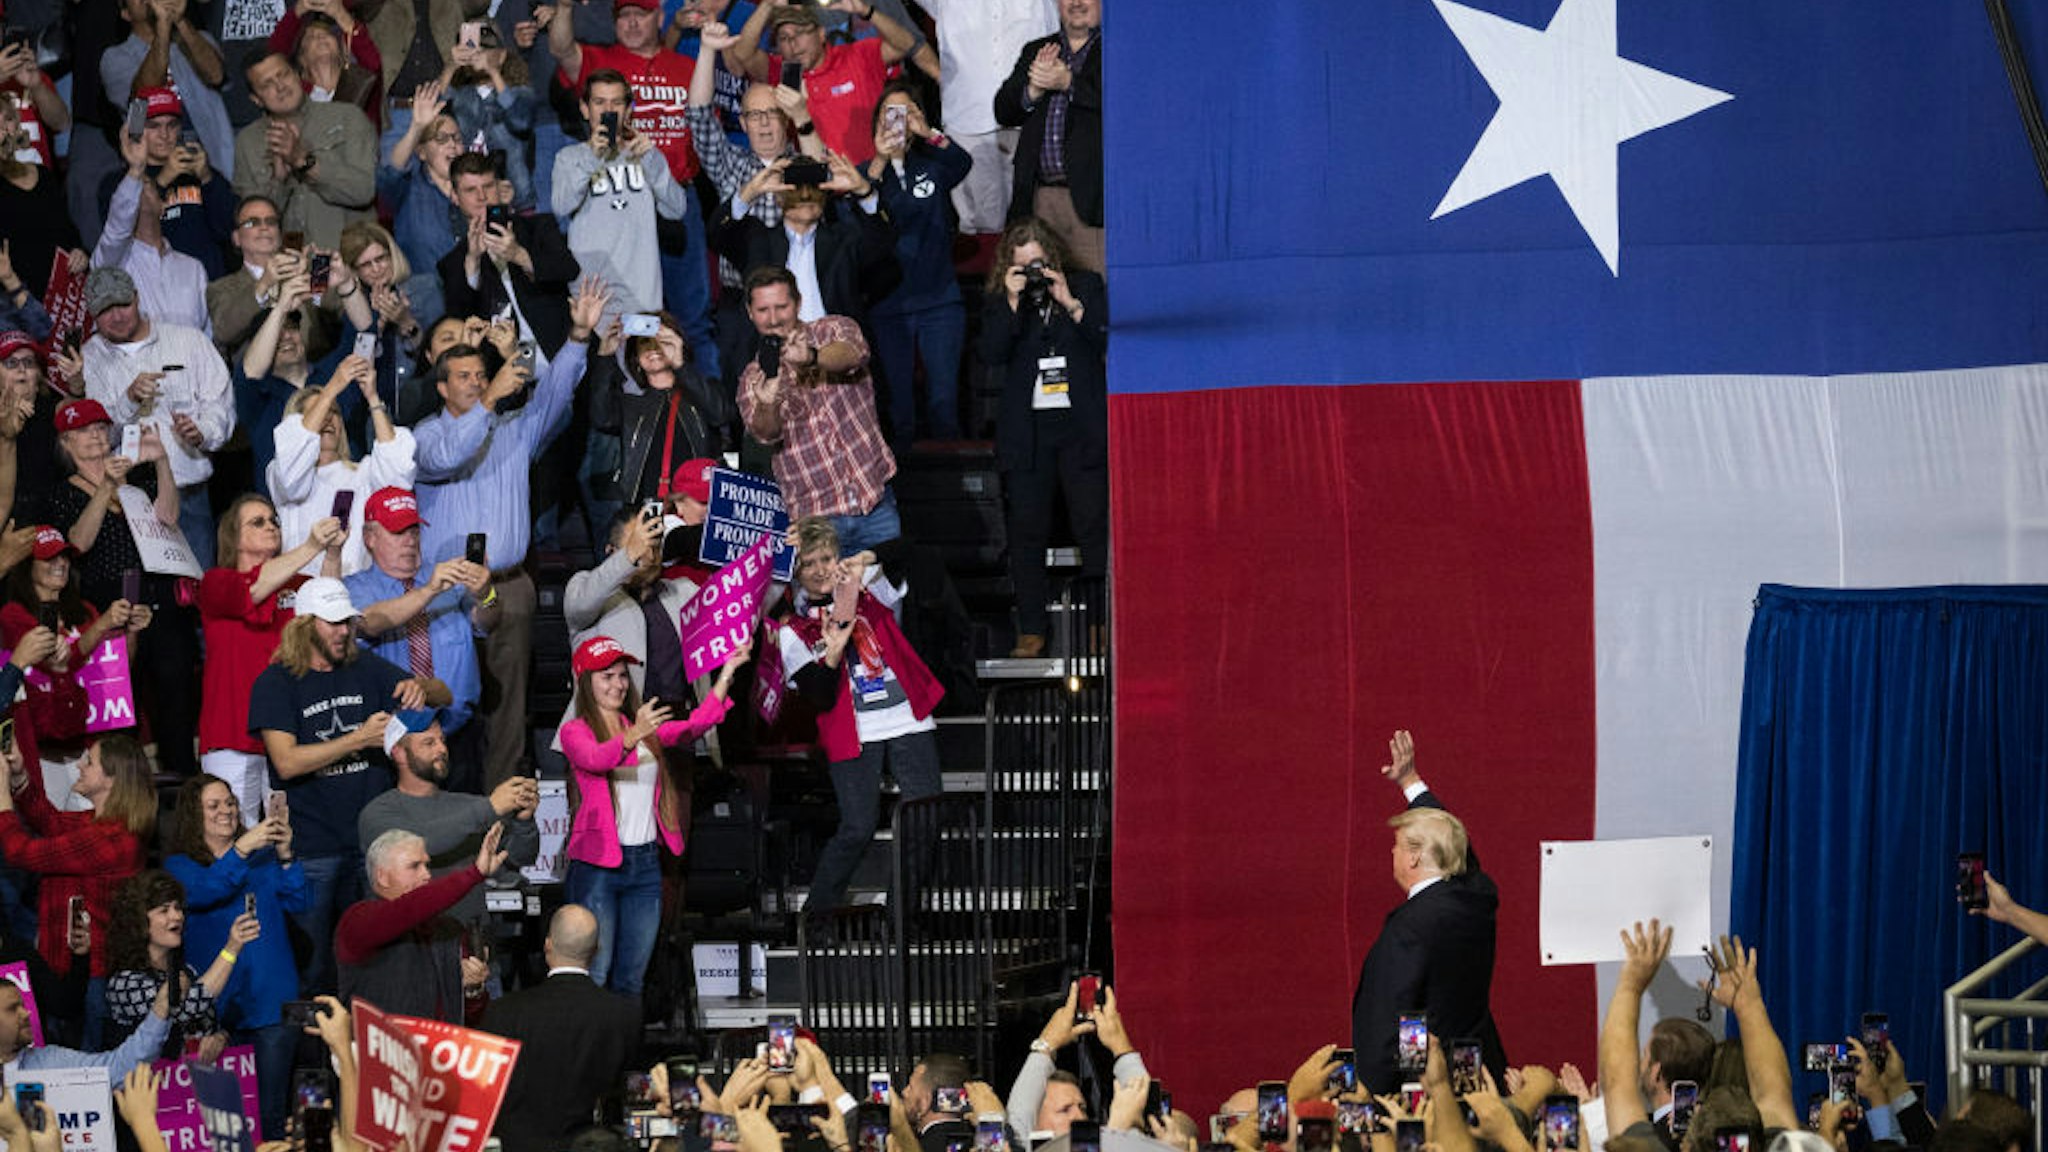 HOUSTON, TX - OCTOBER 22: U.S. President Donald Trump takes the stage for a rally in support of Sen. Ted Cruz (R-TX) on October 22, 2018 at the Toyota Center in Houston, Texas. Cruz, the incumbent, is seeking Senate re-election in a high-profile race against Democratic challenger Beto O'Rourke. (Photo by Loren Elliott/Getty Images)